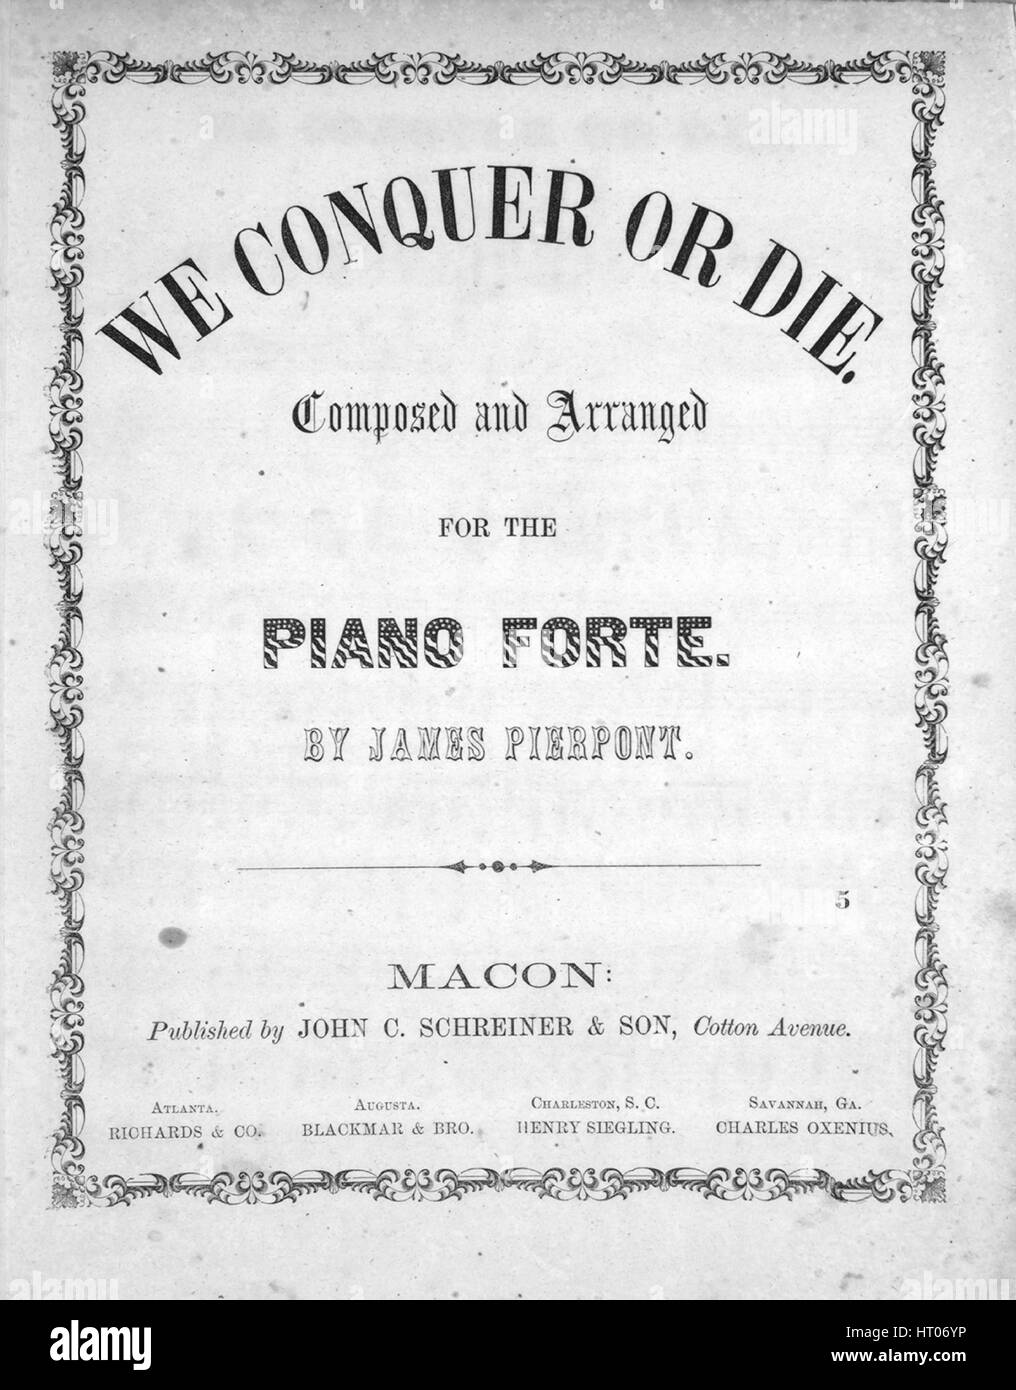 Sheet music cover image of the song 'We Conquer or Die', with original authorship notes reading 'Composed and Arranged for the Piano Forte by James Pierpont', 1861. The publisher is listed as 'John C. Schreiner and Son, Cotton Avenue', the form of composition is 'strophic', the instrumentation is 'piano and voice', the first line reads 'The war drum is beating prepare for the fight, the stern bigot Northman exults in his might', and the illustration artist is listed as 'None'. Stock Photo